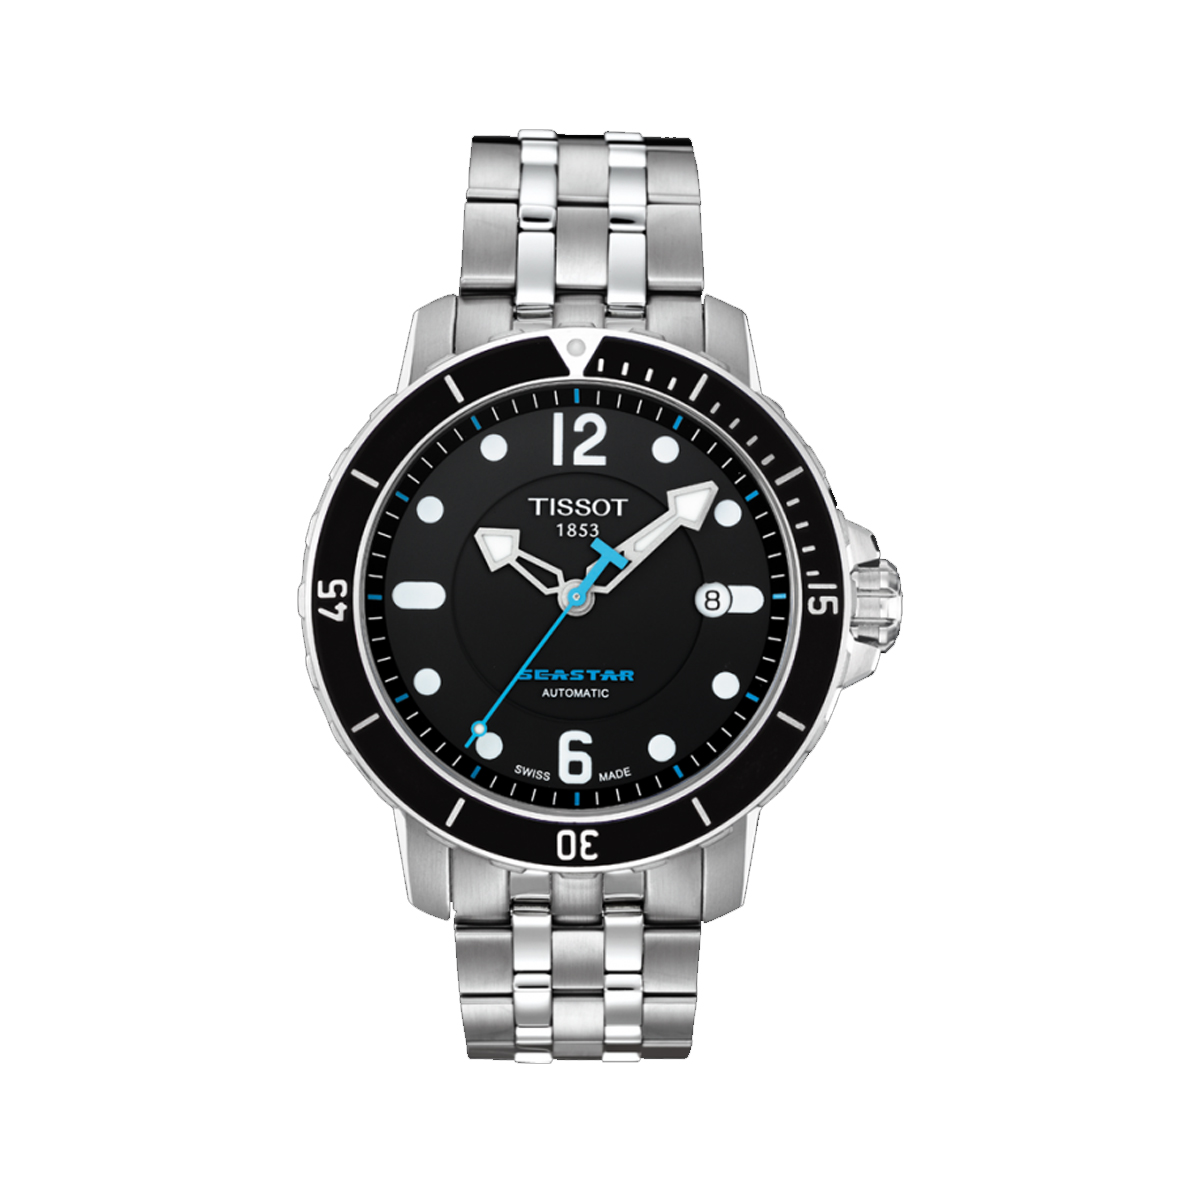 Stainless Steel Tissot SeaStar Automatic Watch